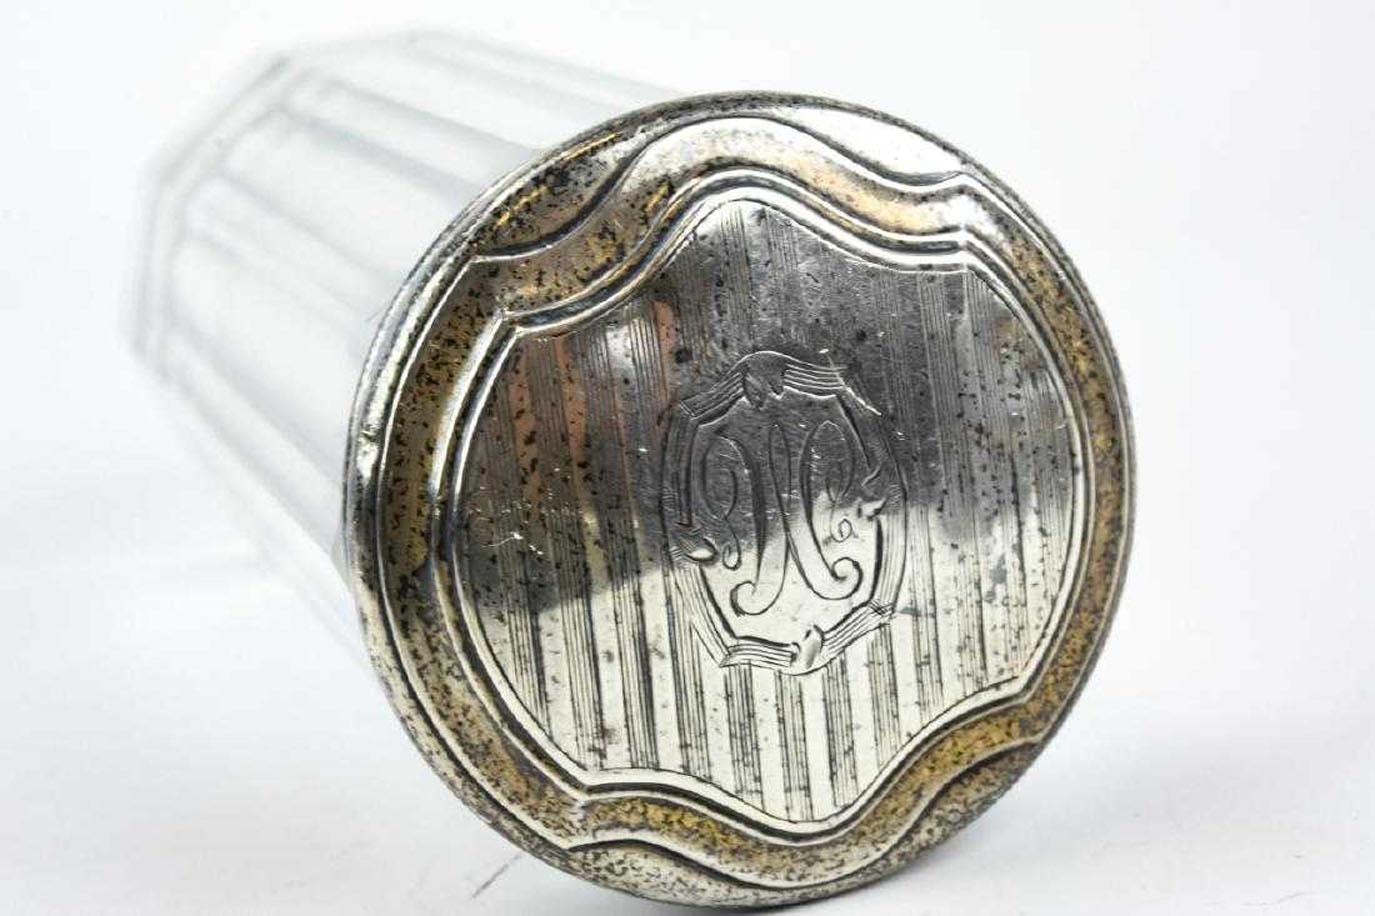 The antique faceted glass bottle with a sterling (stamped) silver top was used for cotton swabs and was possibly part of a larger set of a ladies cosmetic containers. The top of the bottle has threading for a screw top, which the present one does